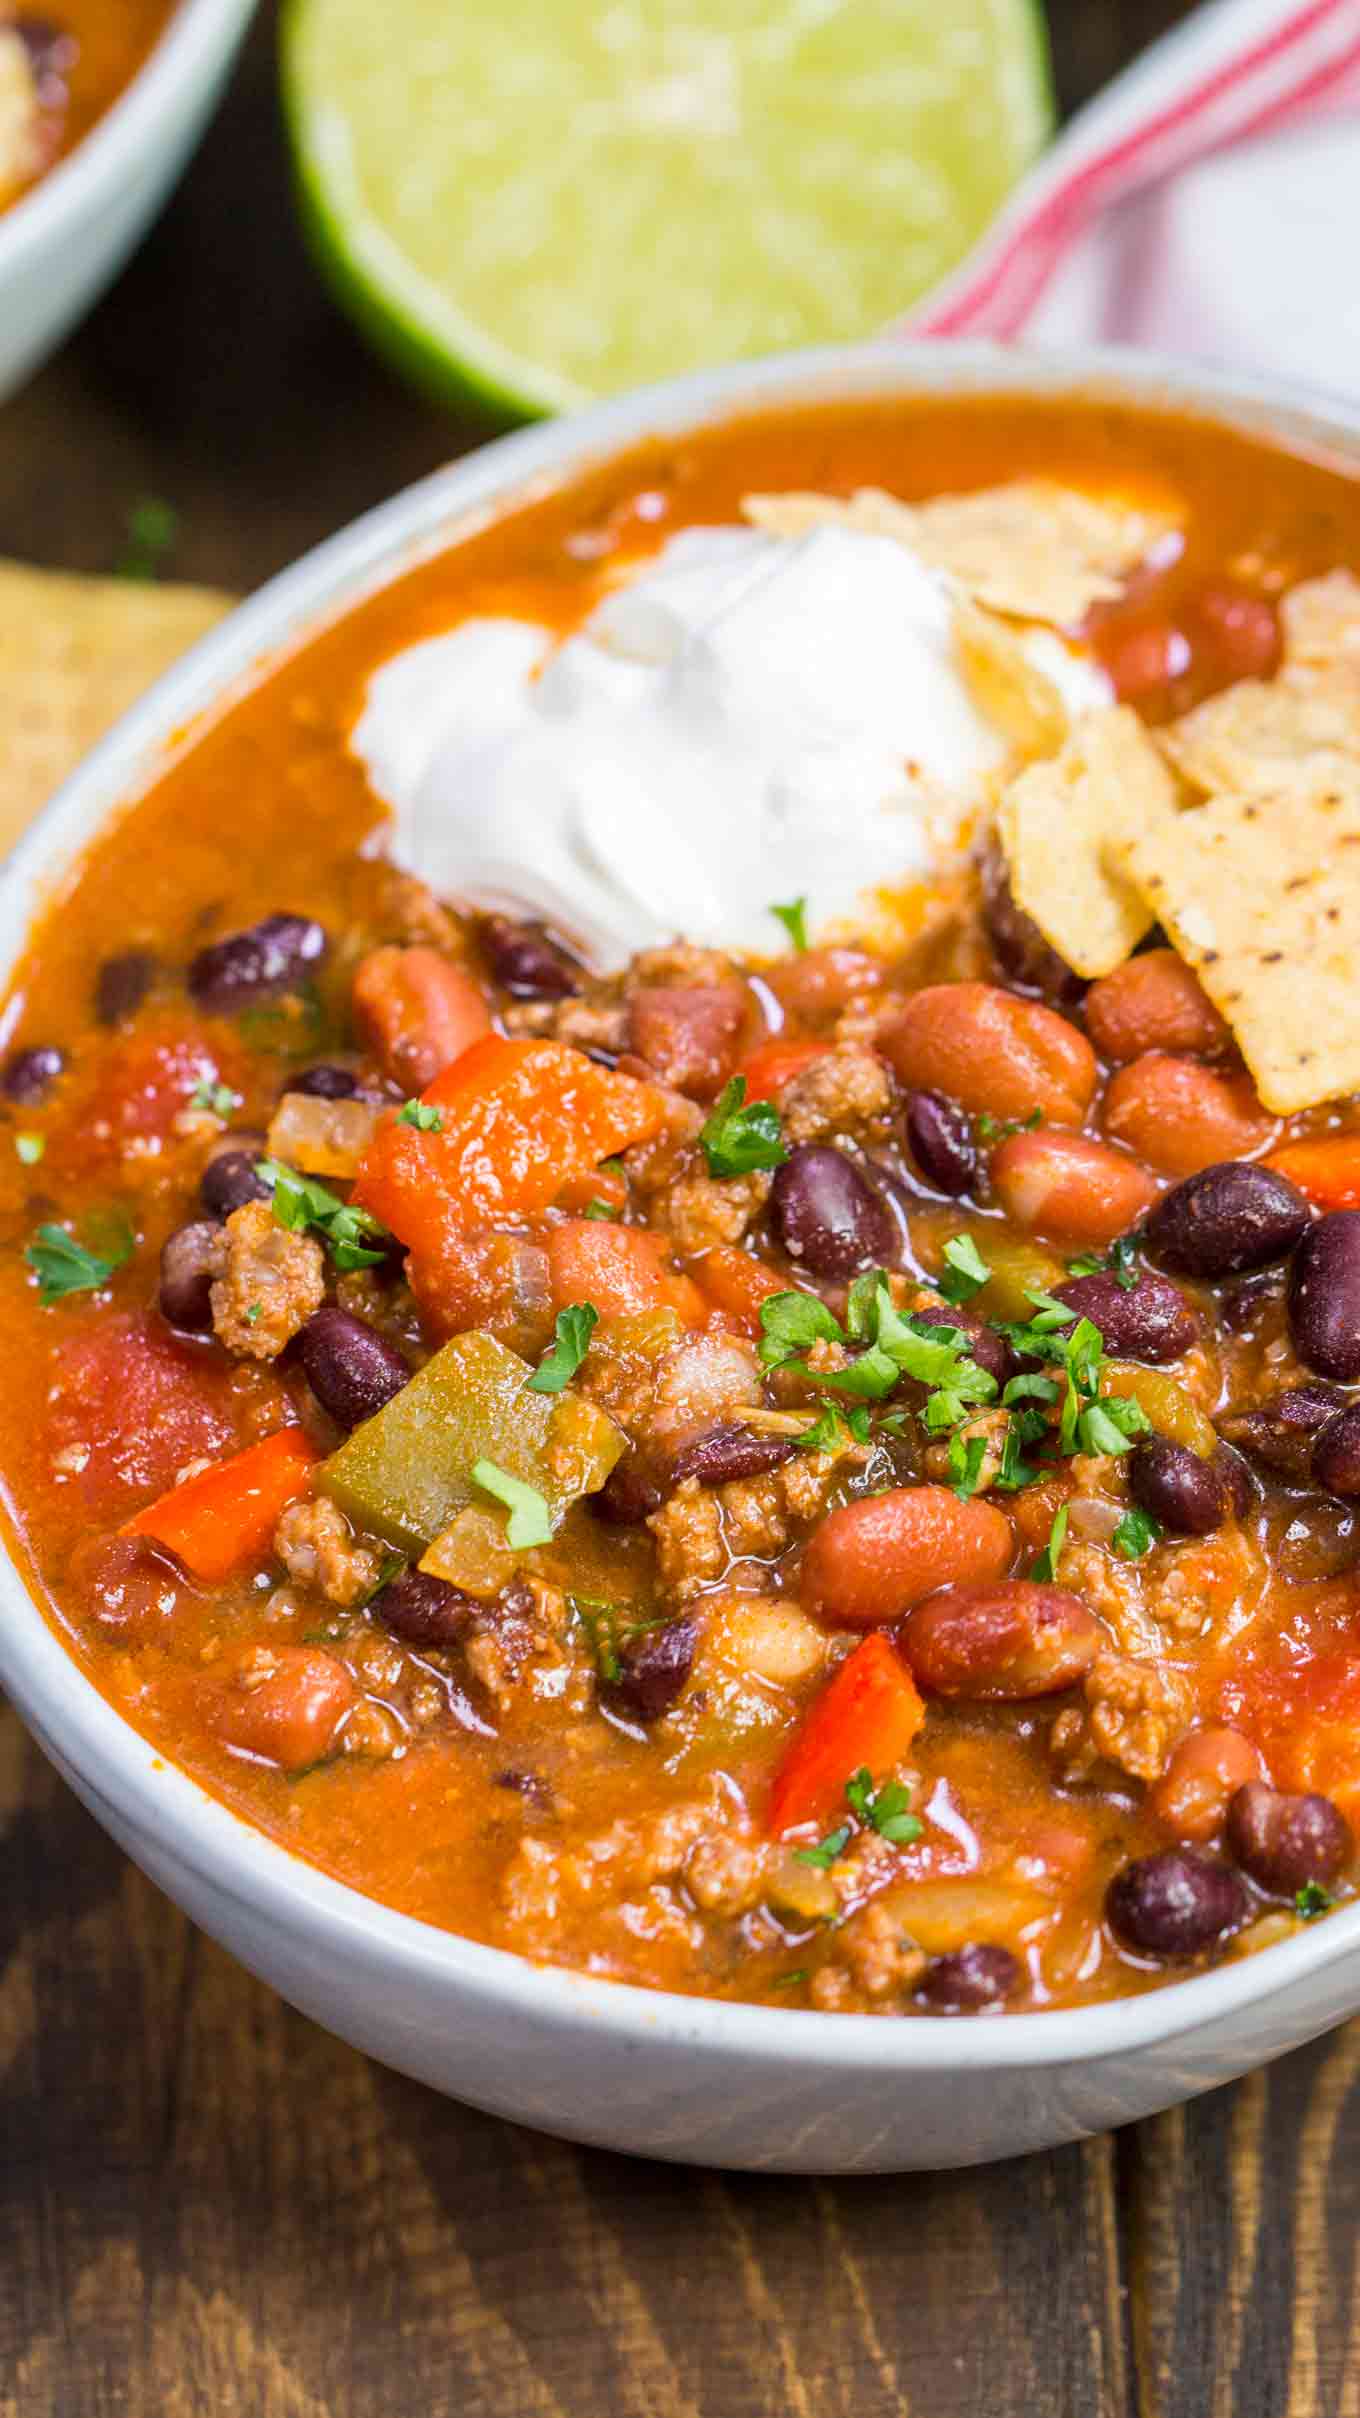 Best Taco Soup Recipe - One Pot [VIDEO] - Sweet and Savory Meals